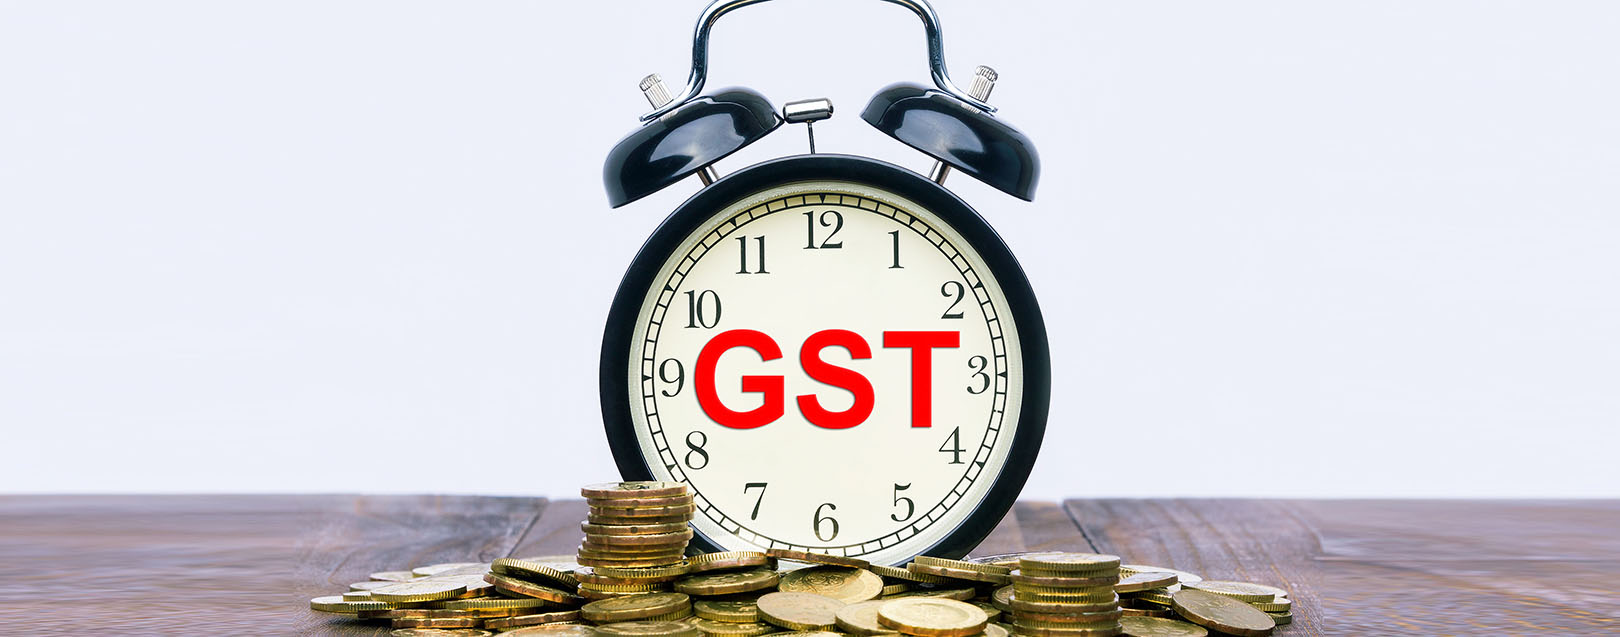 Cabinet approval paves way for presentation of GST bill in Lok Sabha